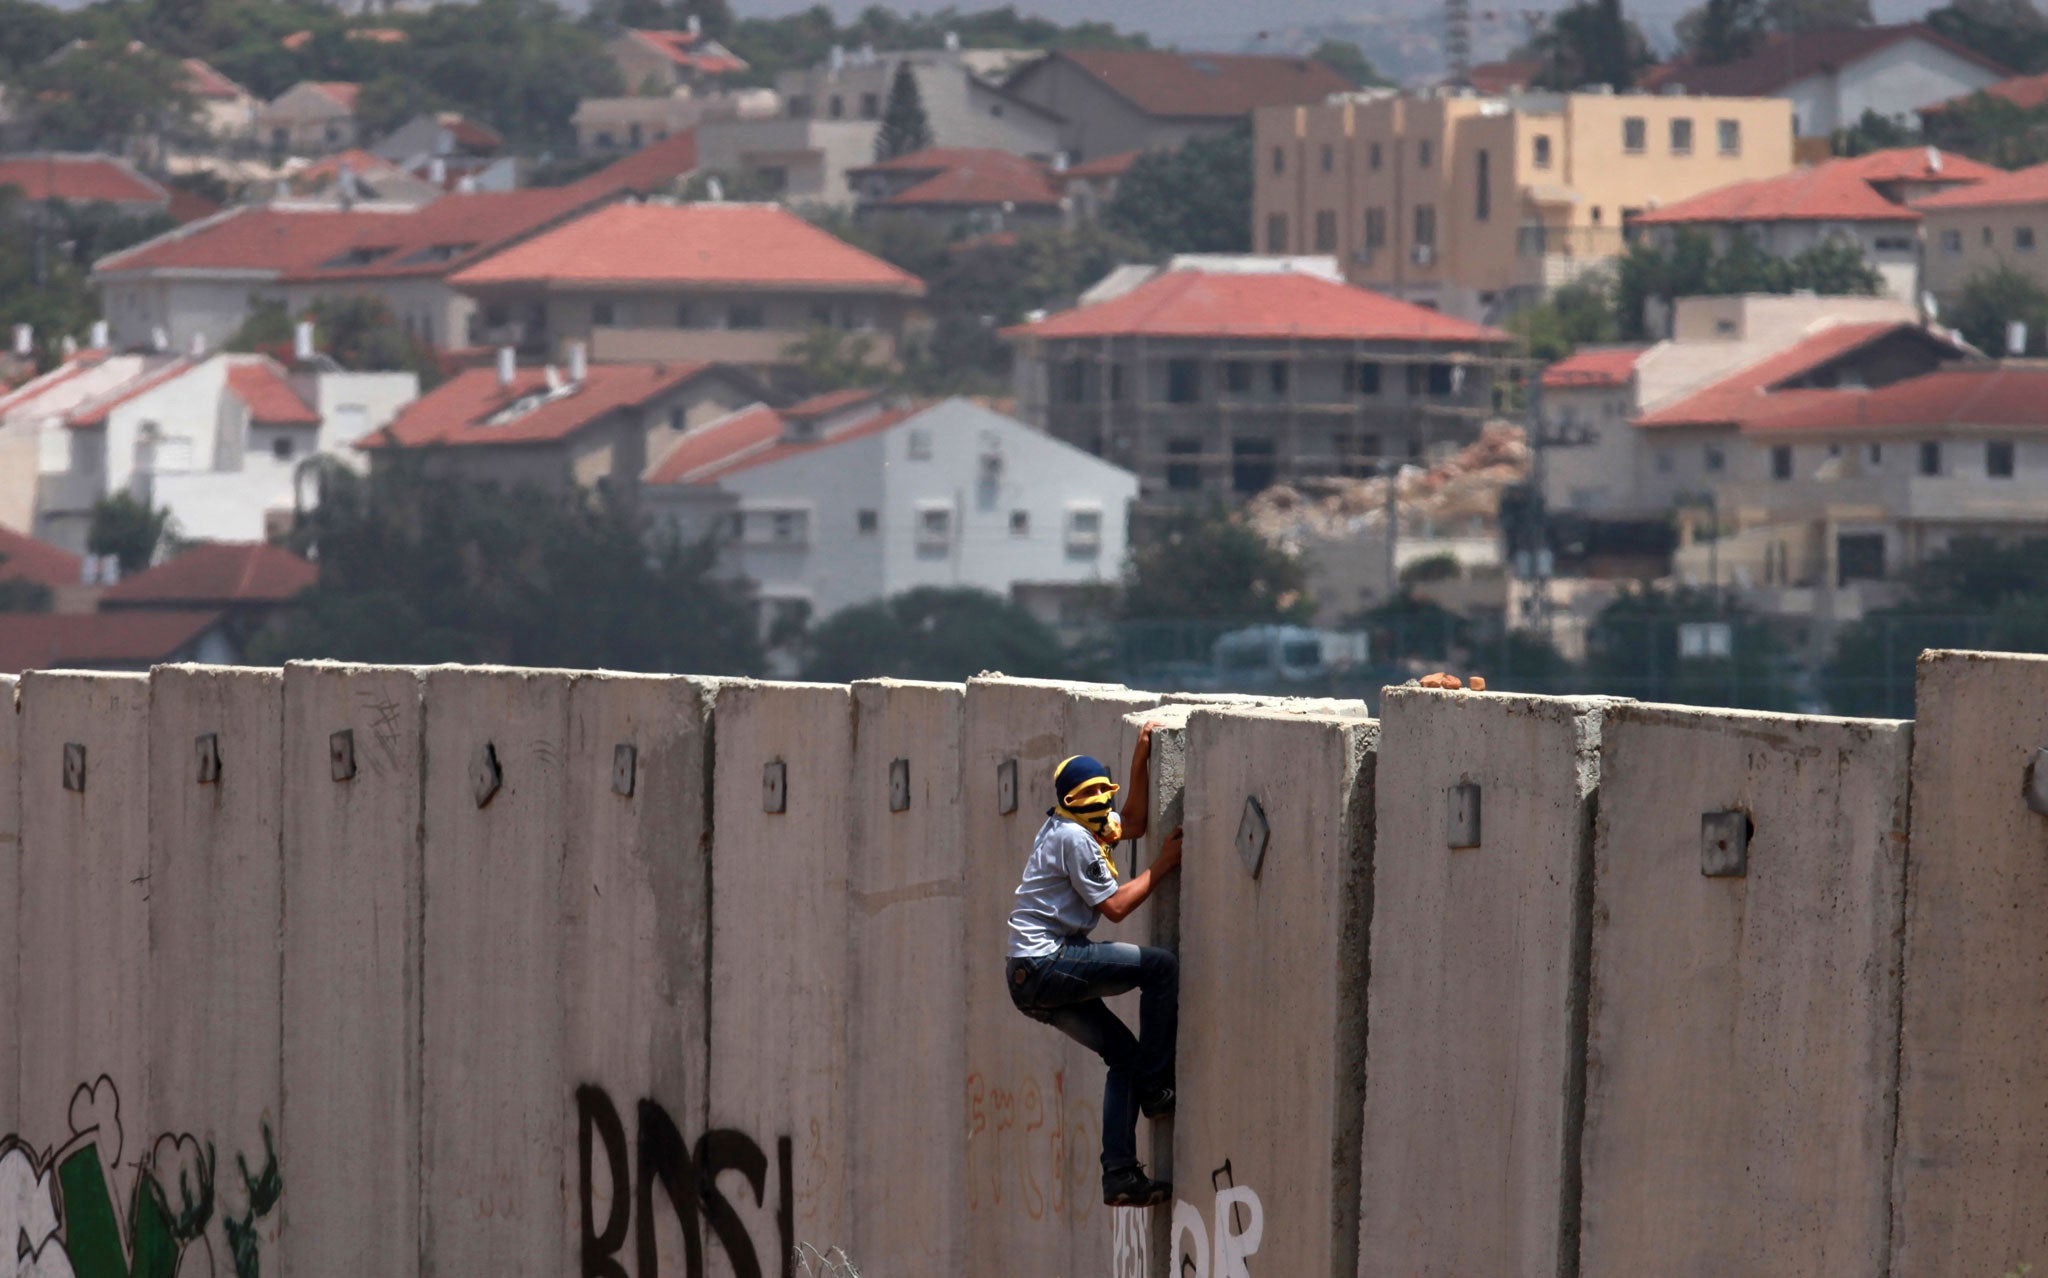 A Palestinian protester climbs Israel's controversial separation barrier during clashes with Israeli security forces following a demonstration against Israeli settlements